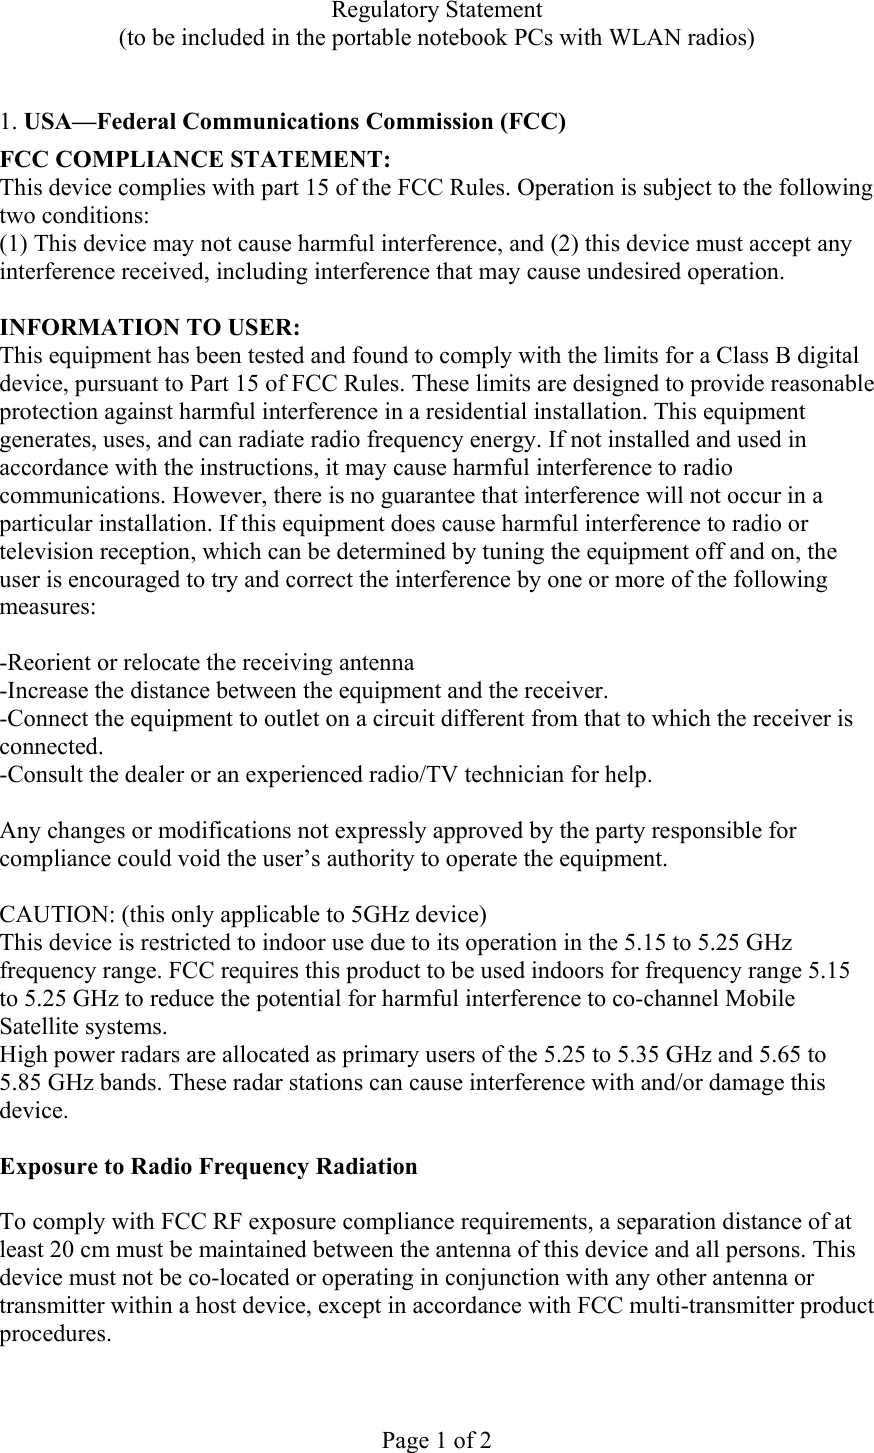 Regulatory Statement (to be included in the portable notebook PCs with WLAN radios)  Page 1 of 2  1. USA—Federal Communications Commission (FCC) FCC COMPLIANCE STATEMENT: This device complies with part 15 of the FCC Rules. Operation is subject to the following two conditions: (1) This device may not cause harmful interference, and (2) this device must accept any interference received, including interference that may cause undesired operation.  INFORMATION TO USER: This equipment has been tested and found to comply with the limits for a Class B digital device, pursuant to Part 15 of FCC Rules. These limits are designed to provide reasonable protection against harmful interference in a residential installation. This equipment generates, uses, and can radiate radio frequency energy. If not installed and used in accordance with the instructions, it may cause harmful interference to radio communications. However, there is no guarantee that interference will not occur in a particular installation. If this equipment does cause harmful interference to radio or television reception, which can be determined by tuning the equipment off and on, the user is encouraged to try and correct the interference by one or more of the following measures:   -Reorient or relocate the receiving antenna -Increase the distance between the equipment and the receiver. -Connect the equipment to outlet on a circuit different from that to which the receiver is connected. -Consult the dealer or an experienced radio/TV technician for help.  Any changes or modifications not expressly approved by the party responsible for compliance could void the user’s authority to operate the equipment.  CAUTION: (this only applicable to 5GHz device) This device is restricted to indoor use due to its operation in the 5.15 to 5.25 GHz frequency range. FCC requires this product to be used indoors for frequency range 5.15 to 5.25 GHz to reduce the potential for harmful interference to co-channel Mobile Satellite systems. High power radars are allocated as primary users of the 5.25 to 5.35 GHz and 5.65 to 5.85 GHz bands. These radar stations can cause interference with and/or damage this device.  Exposure to Radio Frequency Radiation  To comply with FCC RF exposure compliance requirements, a separation distance of at least 20 cm must be maintained between the antenna of this device and all persons. This device must not be co-located or operating in conjunction with any other antenna or transmitter within a host device, except in accordance with FCC multi-transmitter product procedures.  